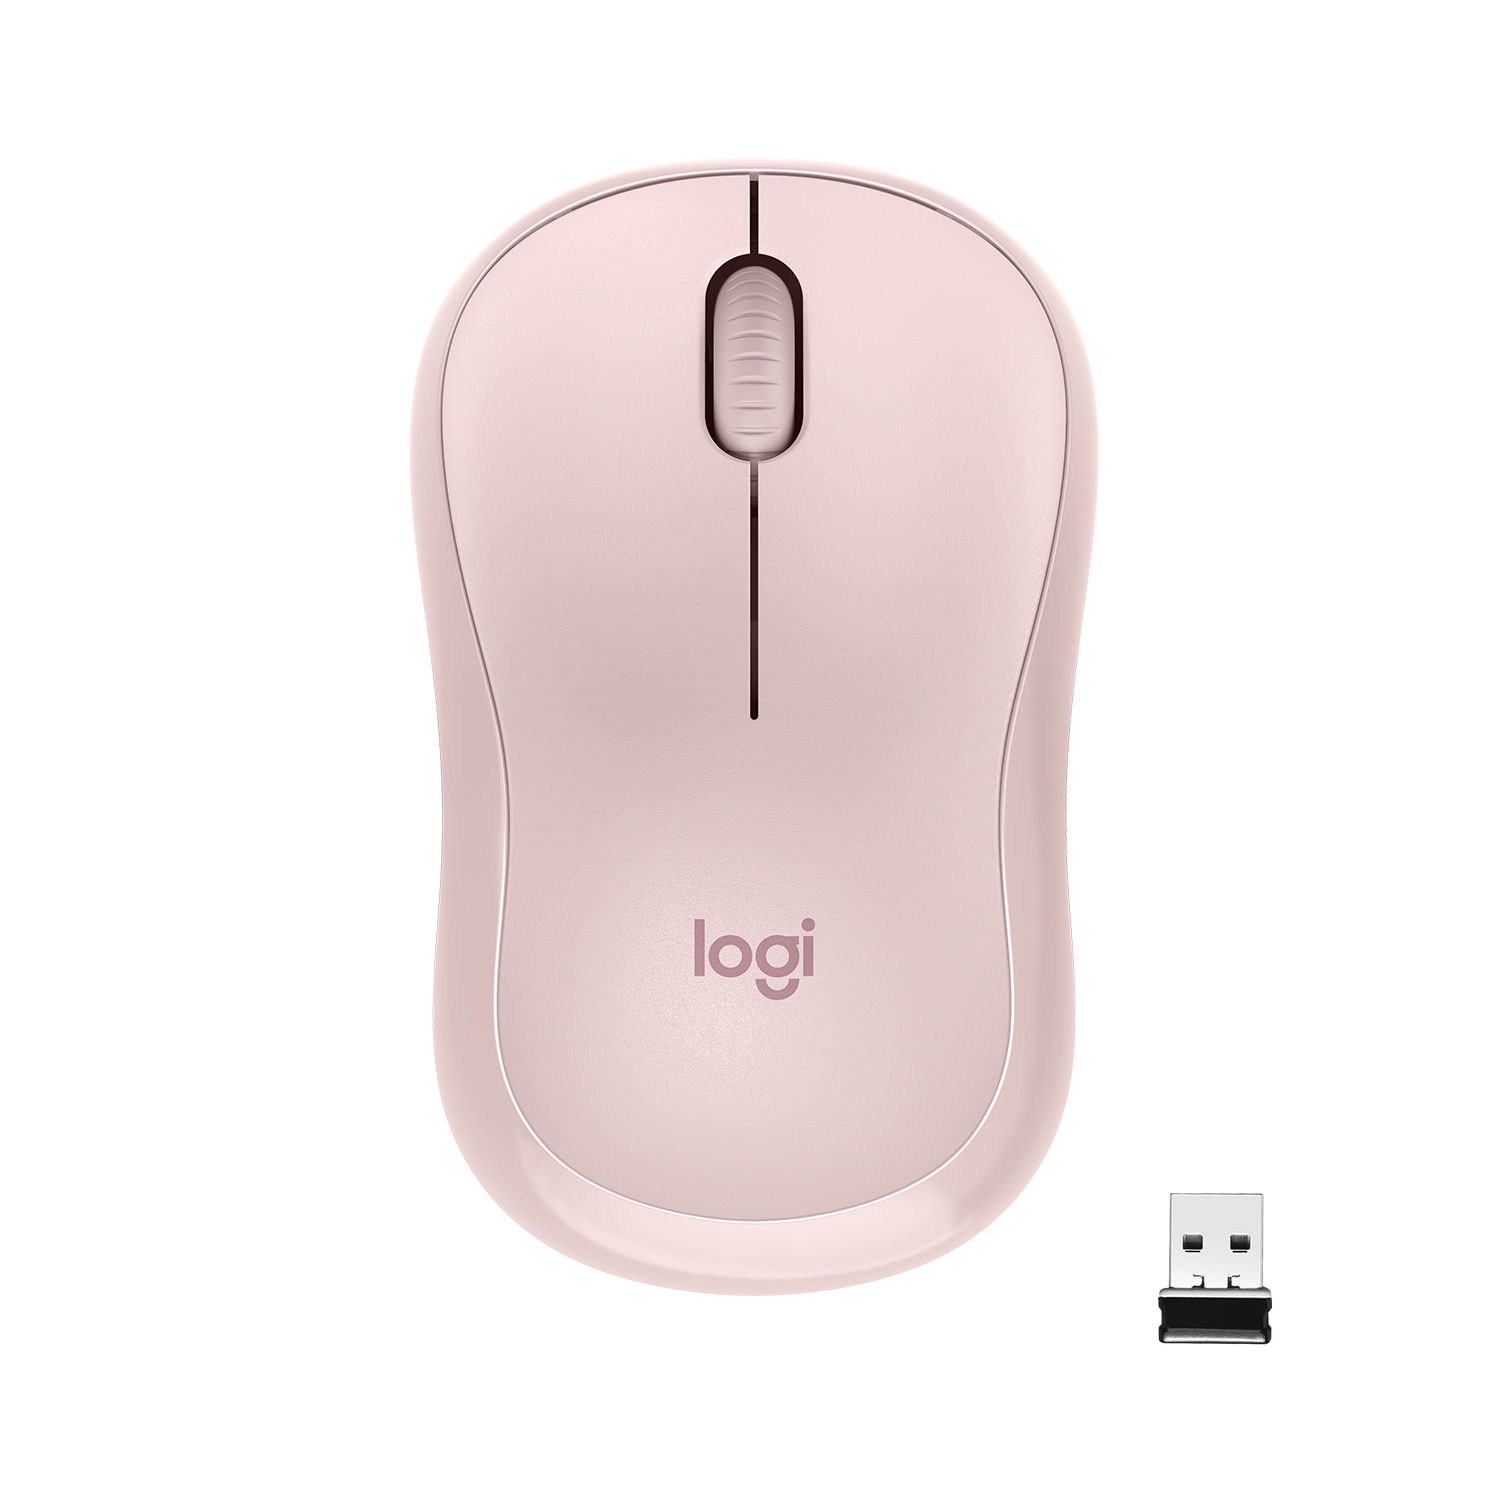 Logitech Silent WRLS Mouse, 2.4 GHz with USB Receiver, Optical Tracking, Ambidextrous, Rose - image 1 of 8